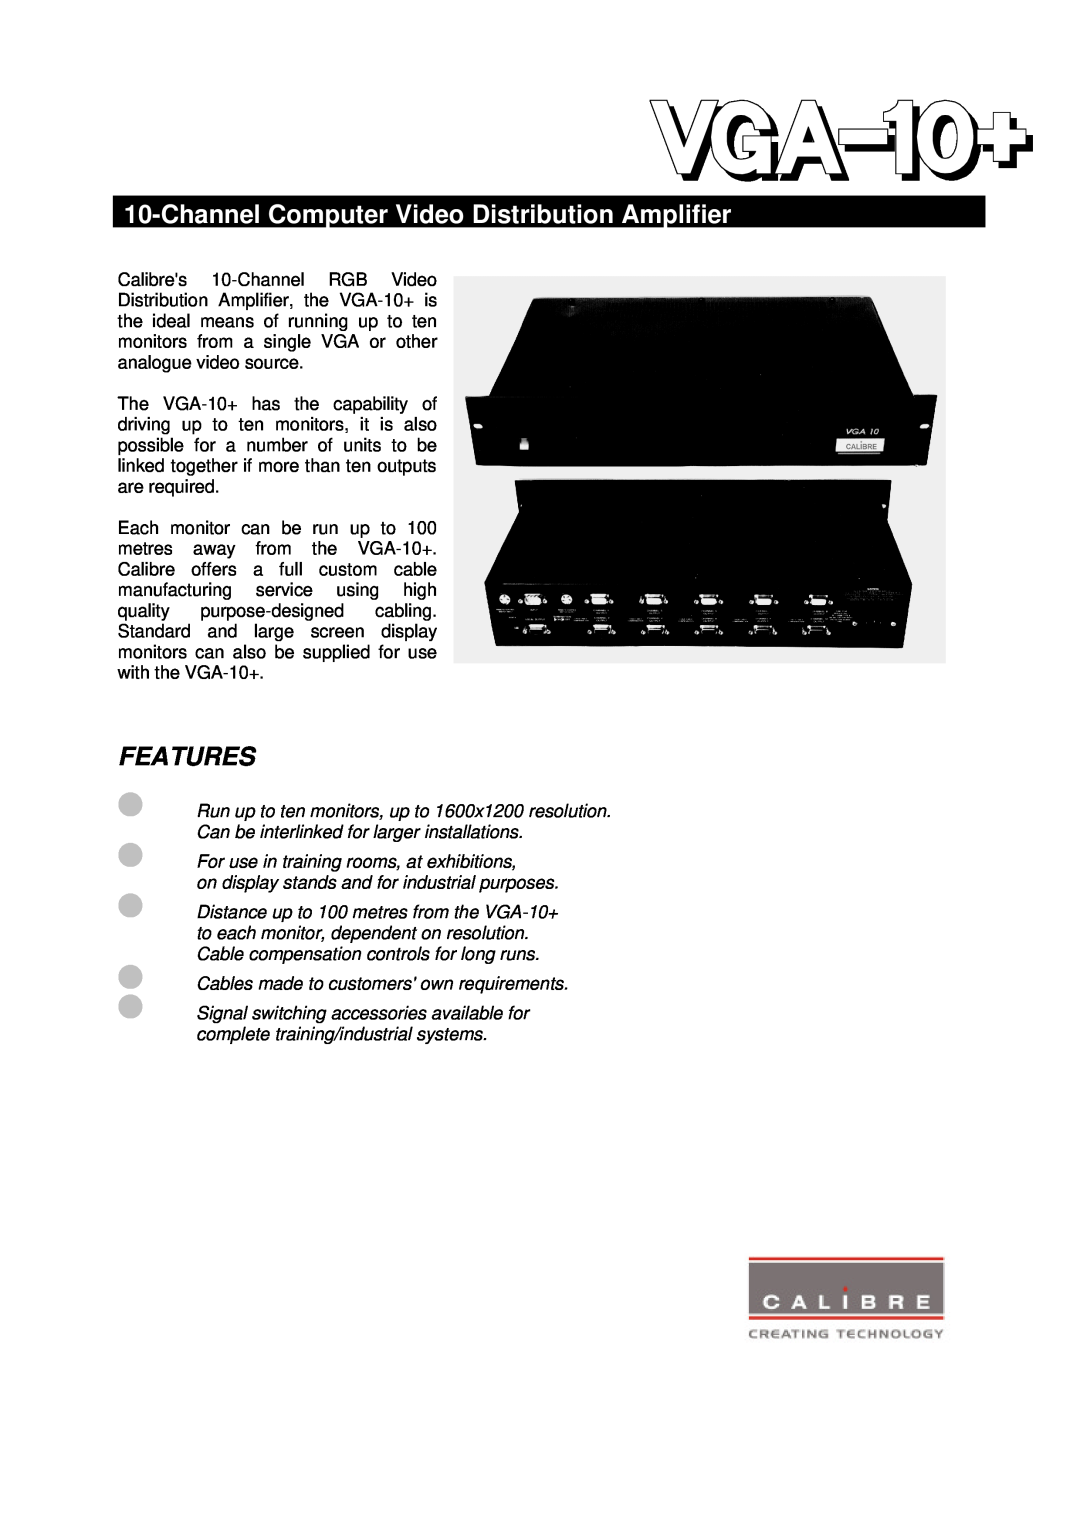 Calibre UK VGA-10+ manual ChannelComputer Video Distribution Amplifier, Features 